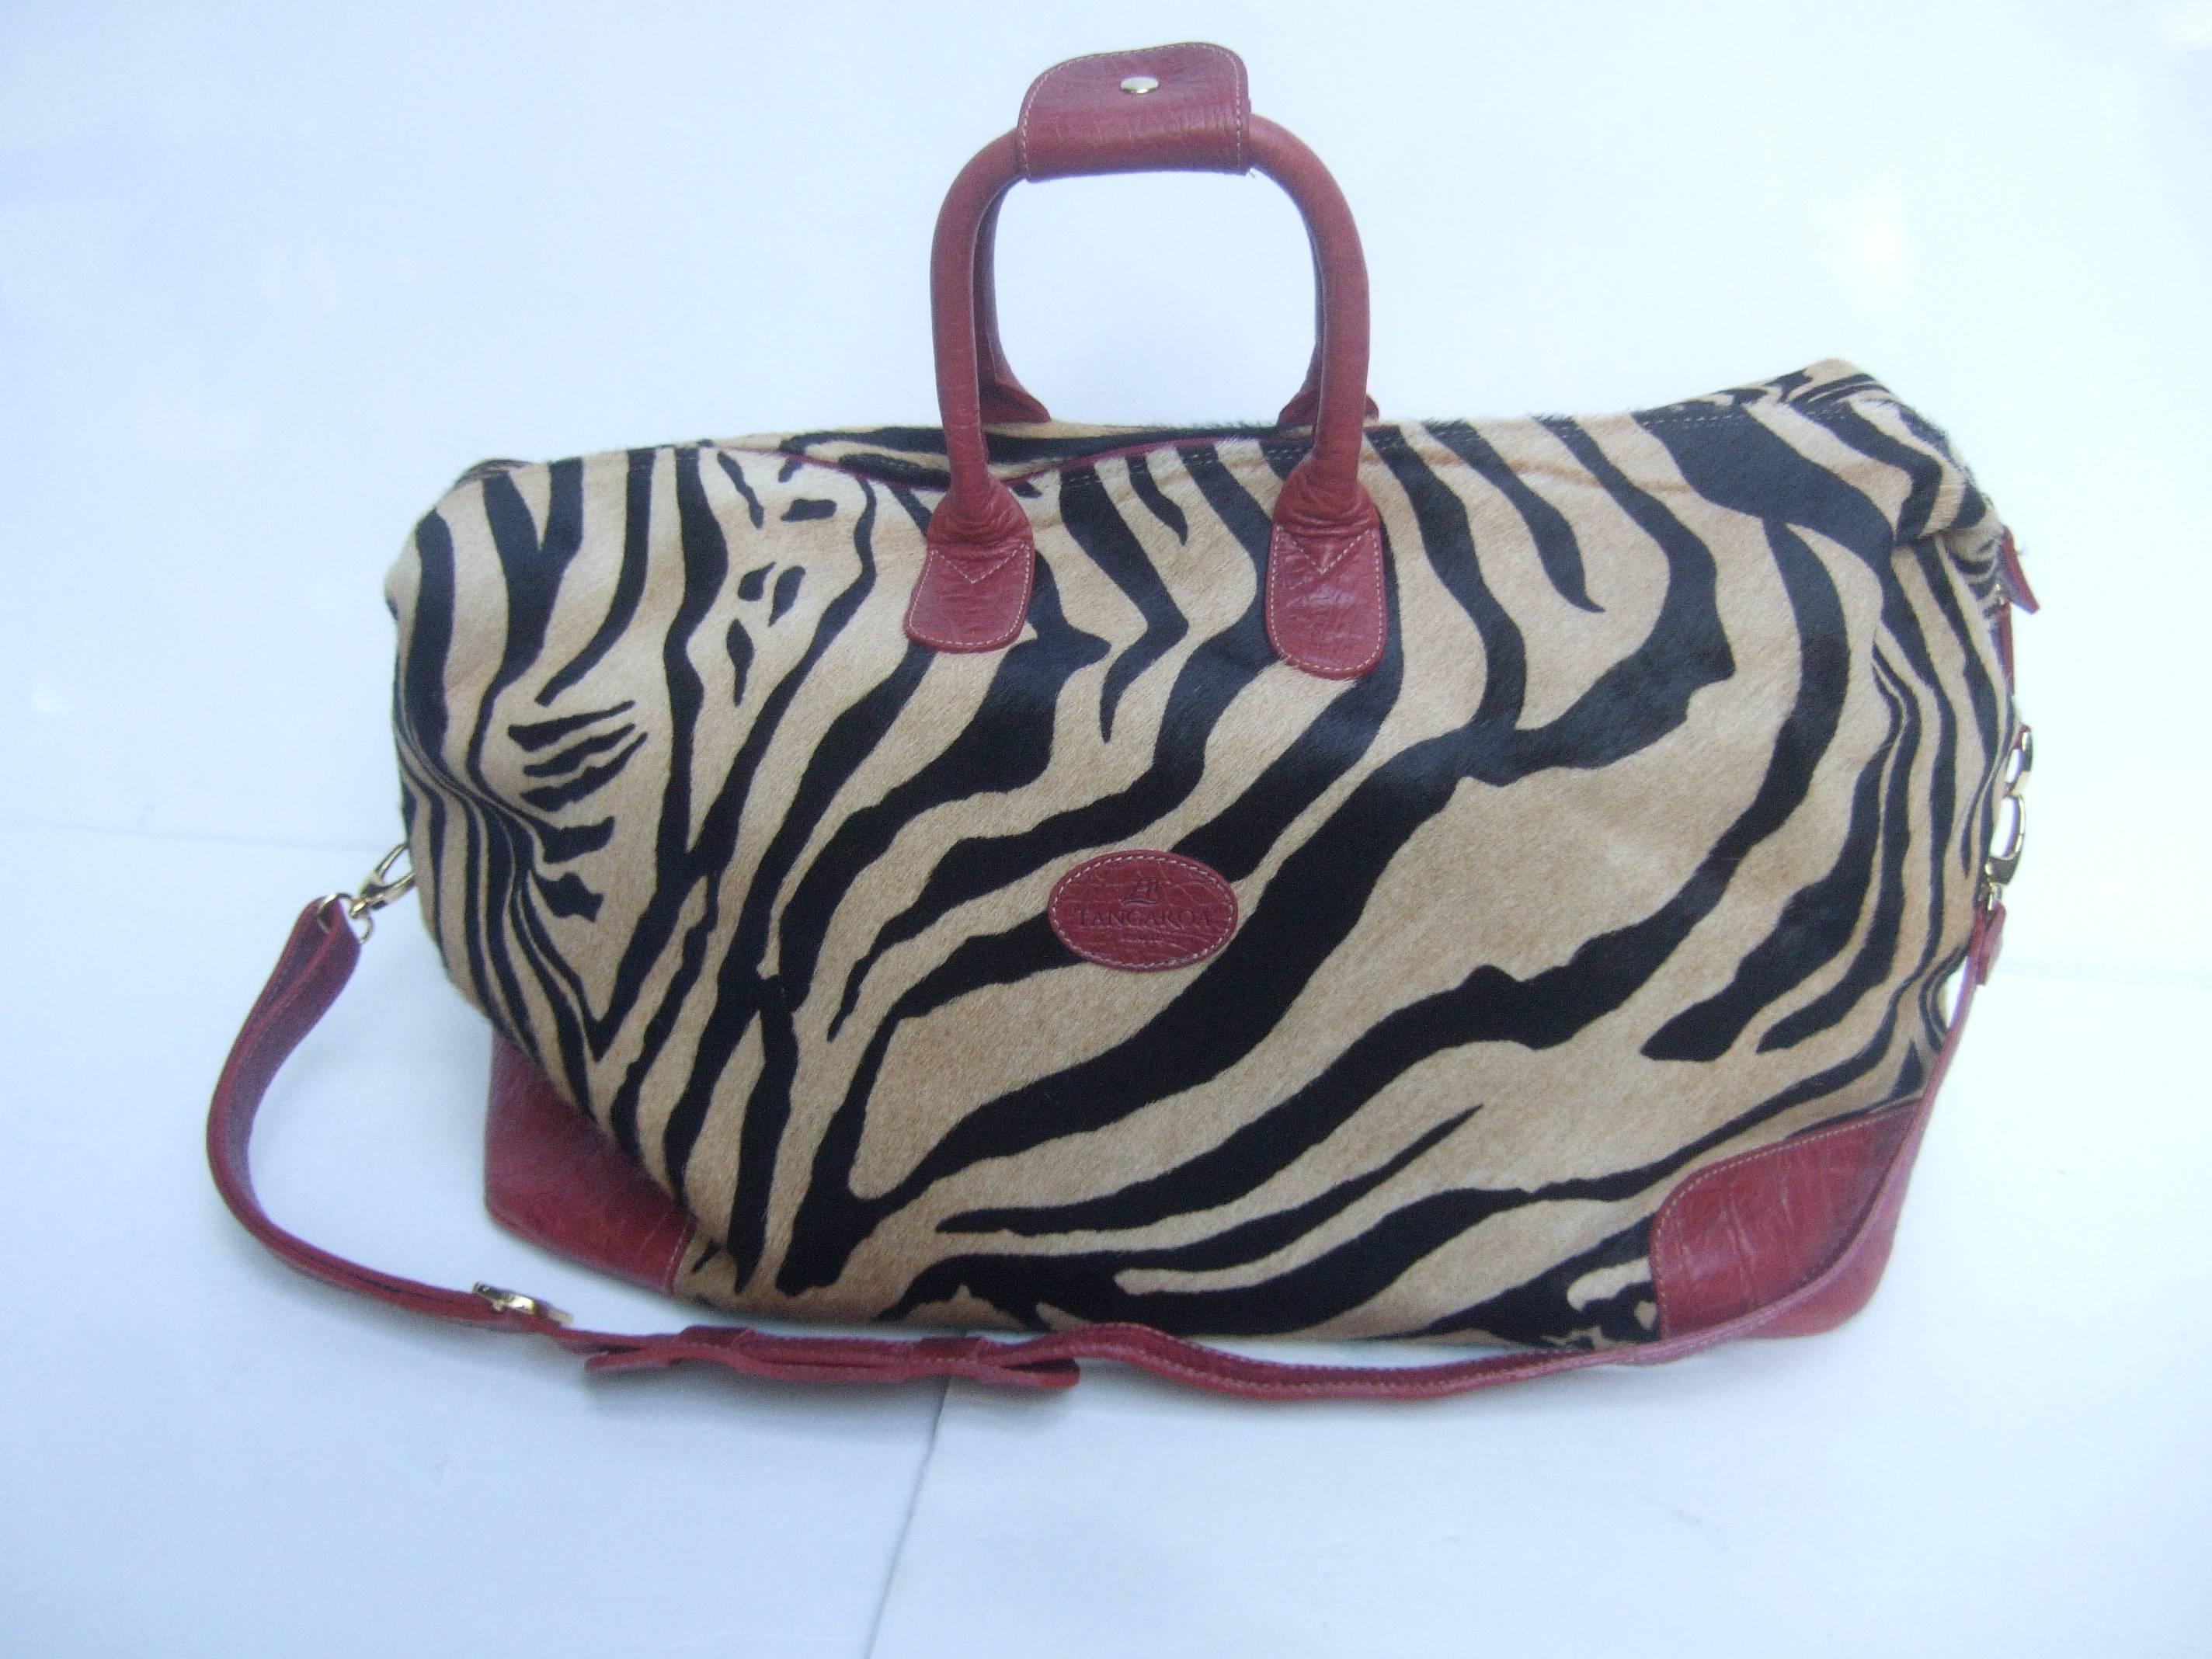 Exotic Zebra pony hair travel bag by Tangaroa Terrida Italy
The stylish travel bag is covered with animal print
pony hair on the exterior

The twin handles, shoulder strap, corners and
base of the Italian carry on travel bag are
accented with